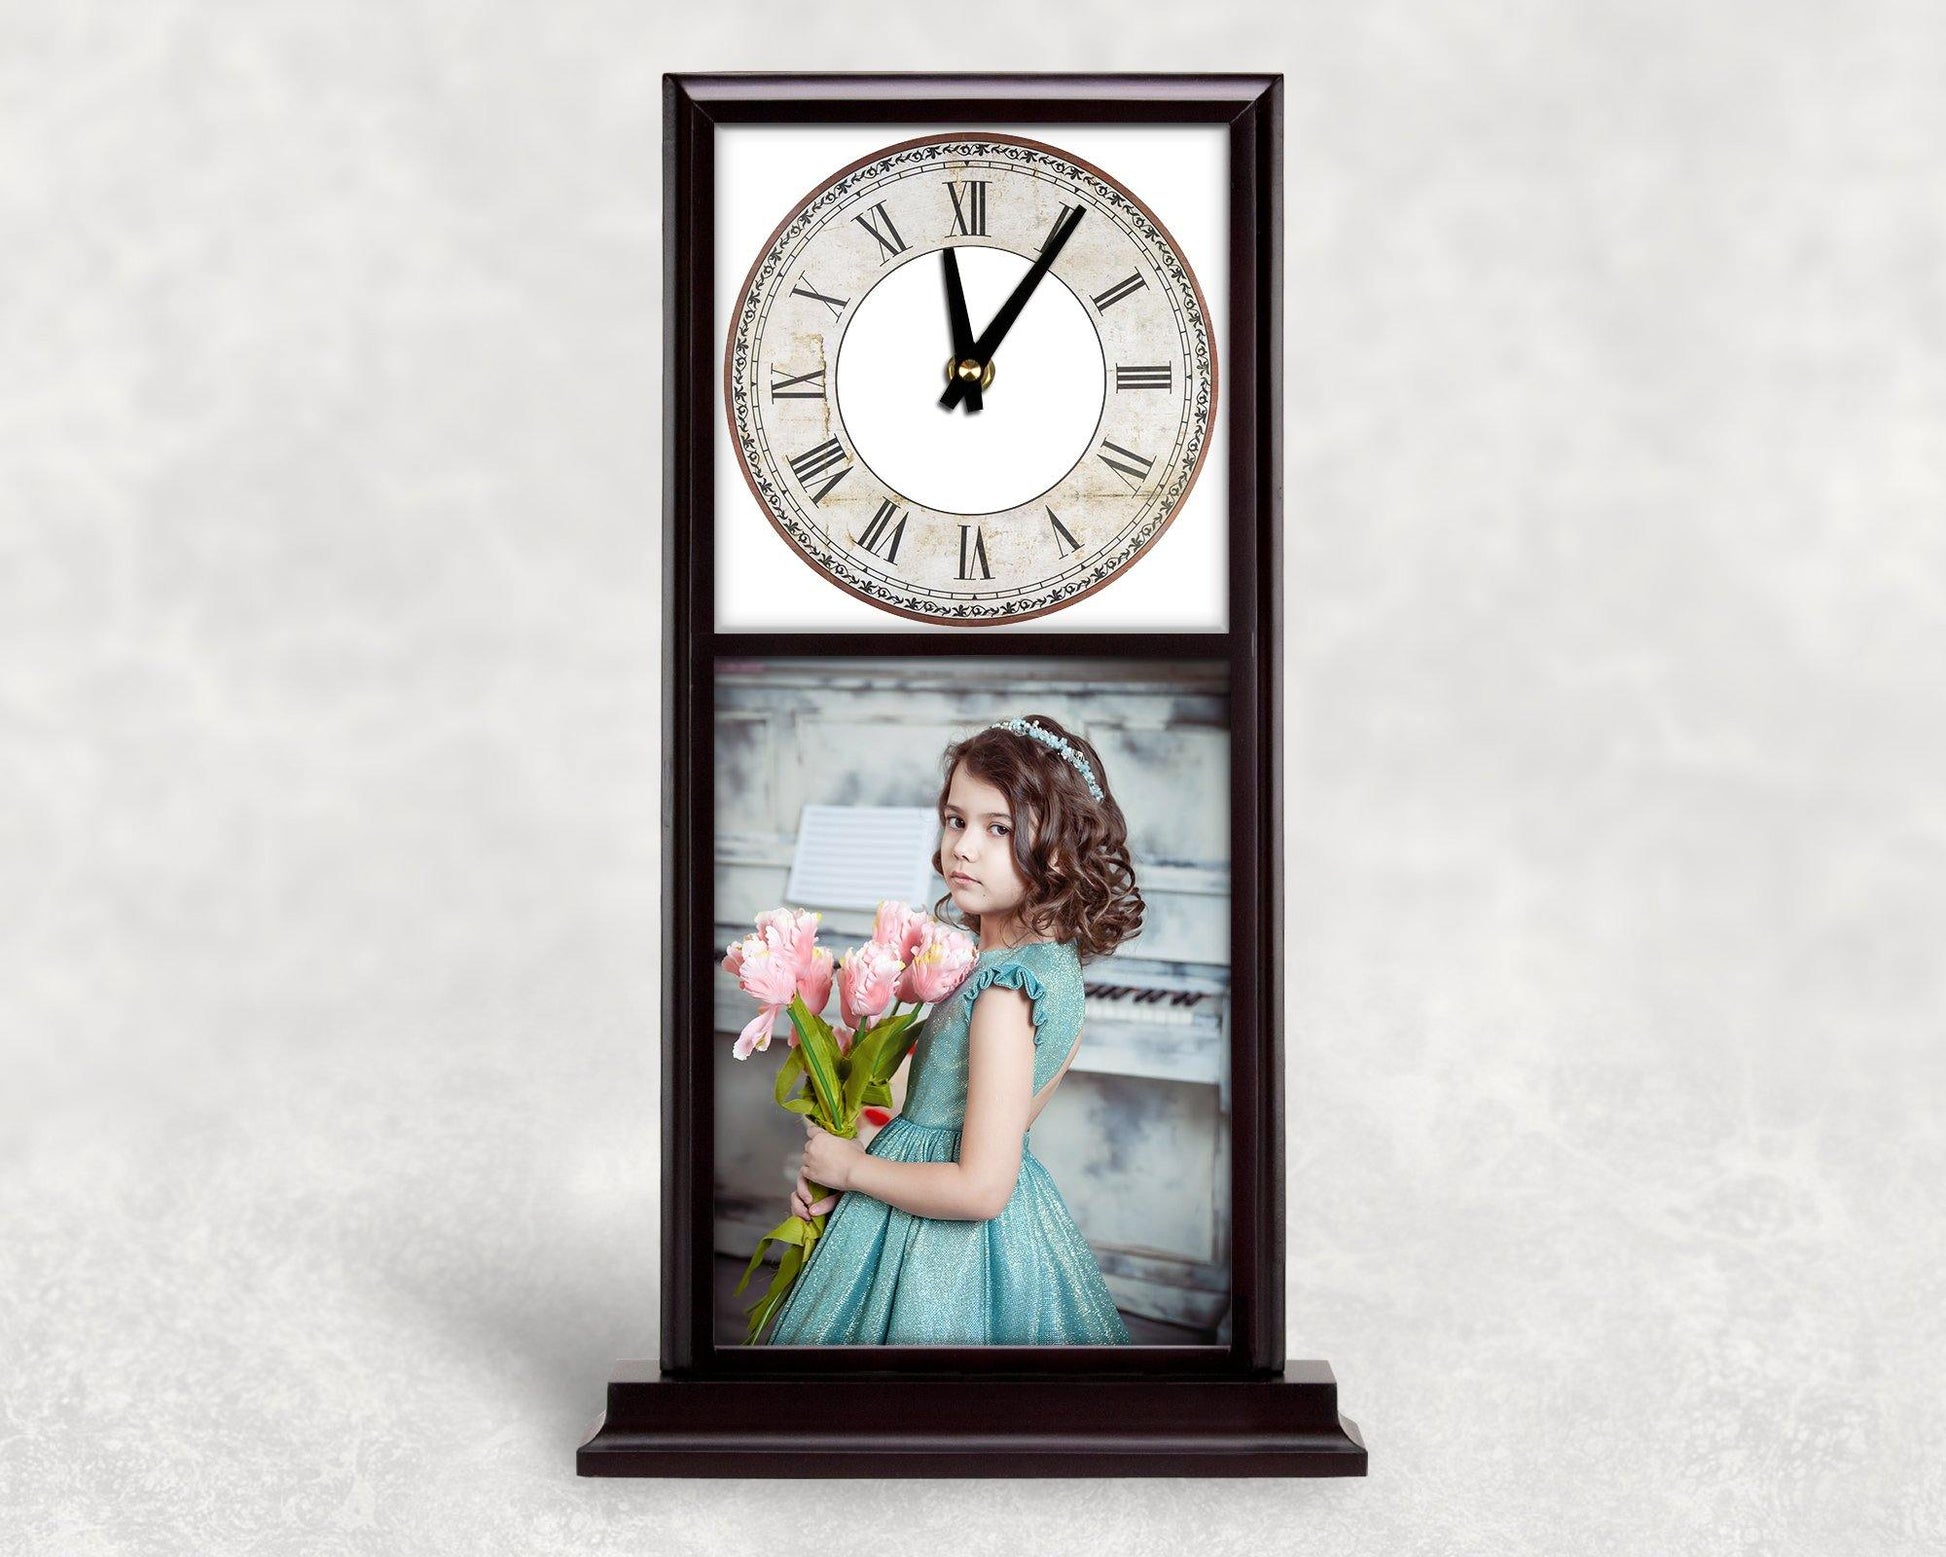 Create Your Own Mantle Clock - Schoppix Gifts